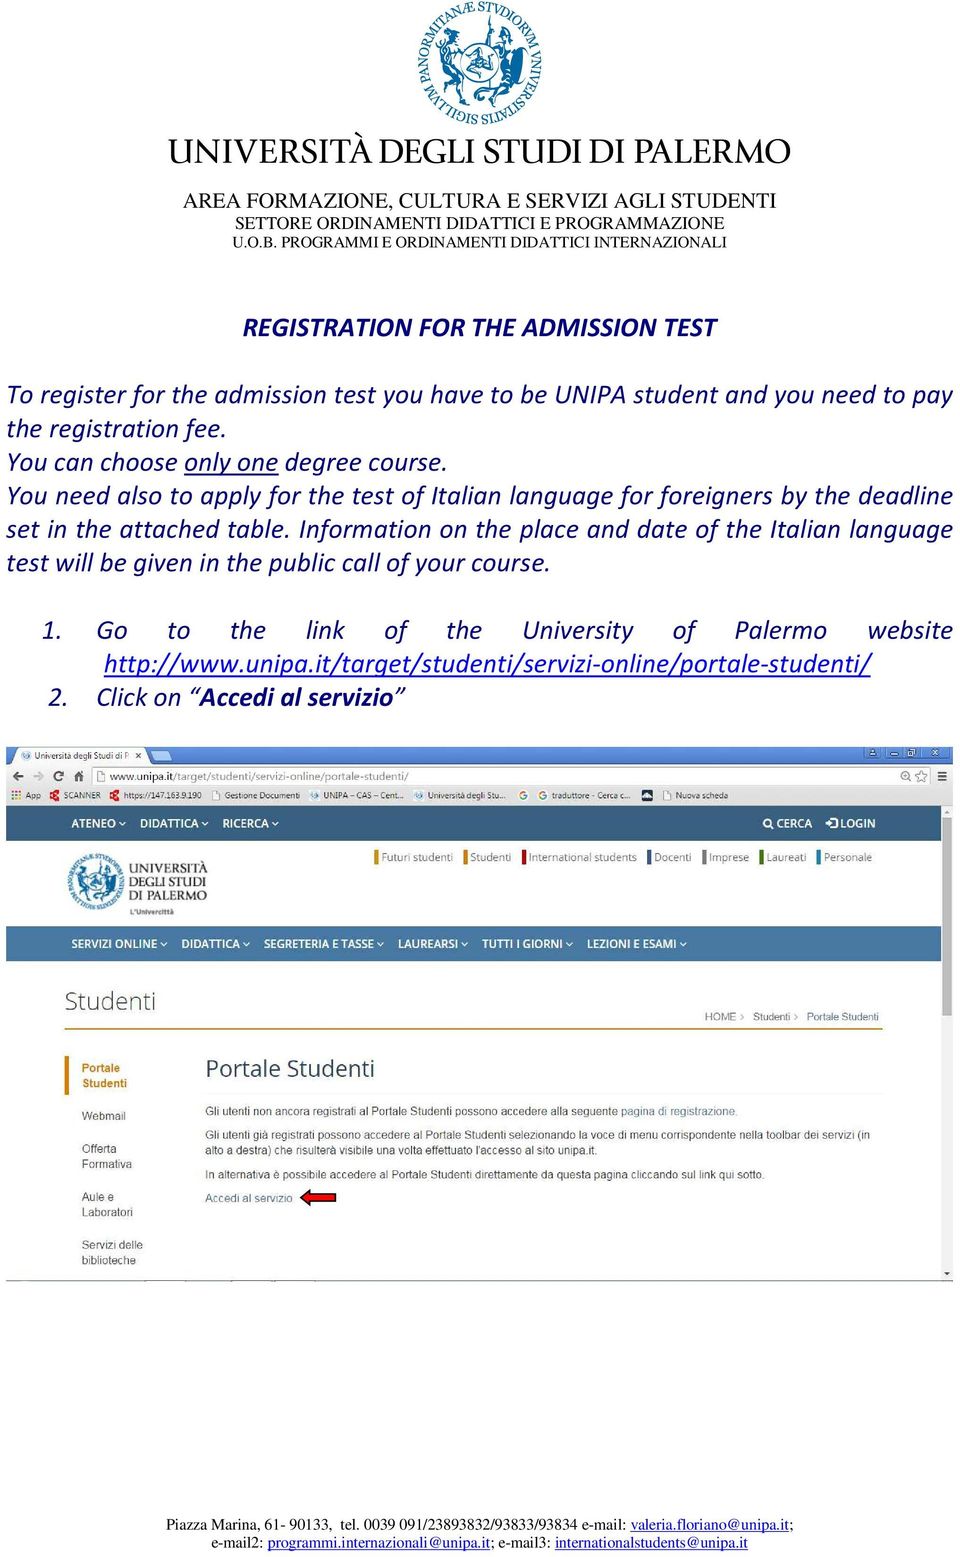 You need also to apply for the test of Italian language for foreigners by the deadline set in the attached table.